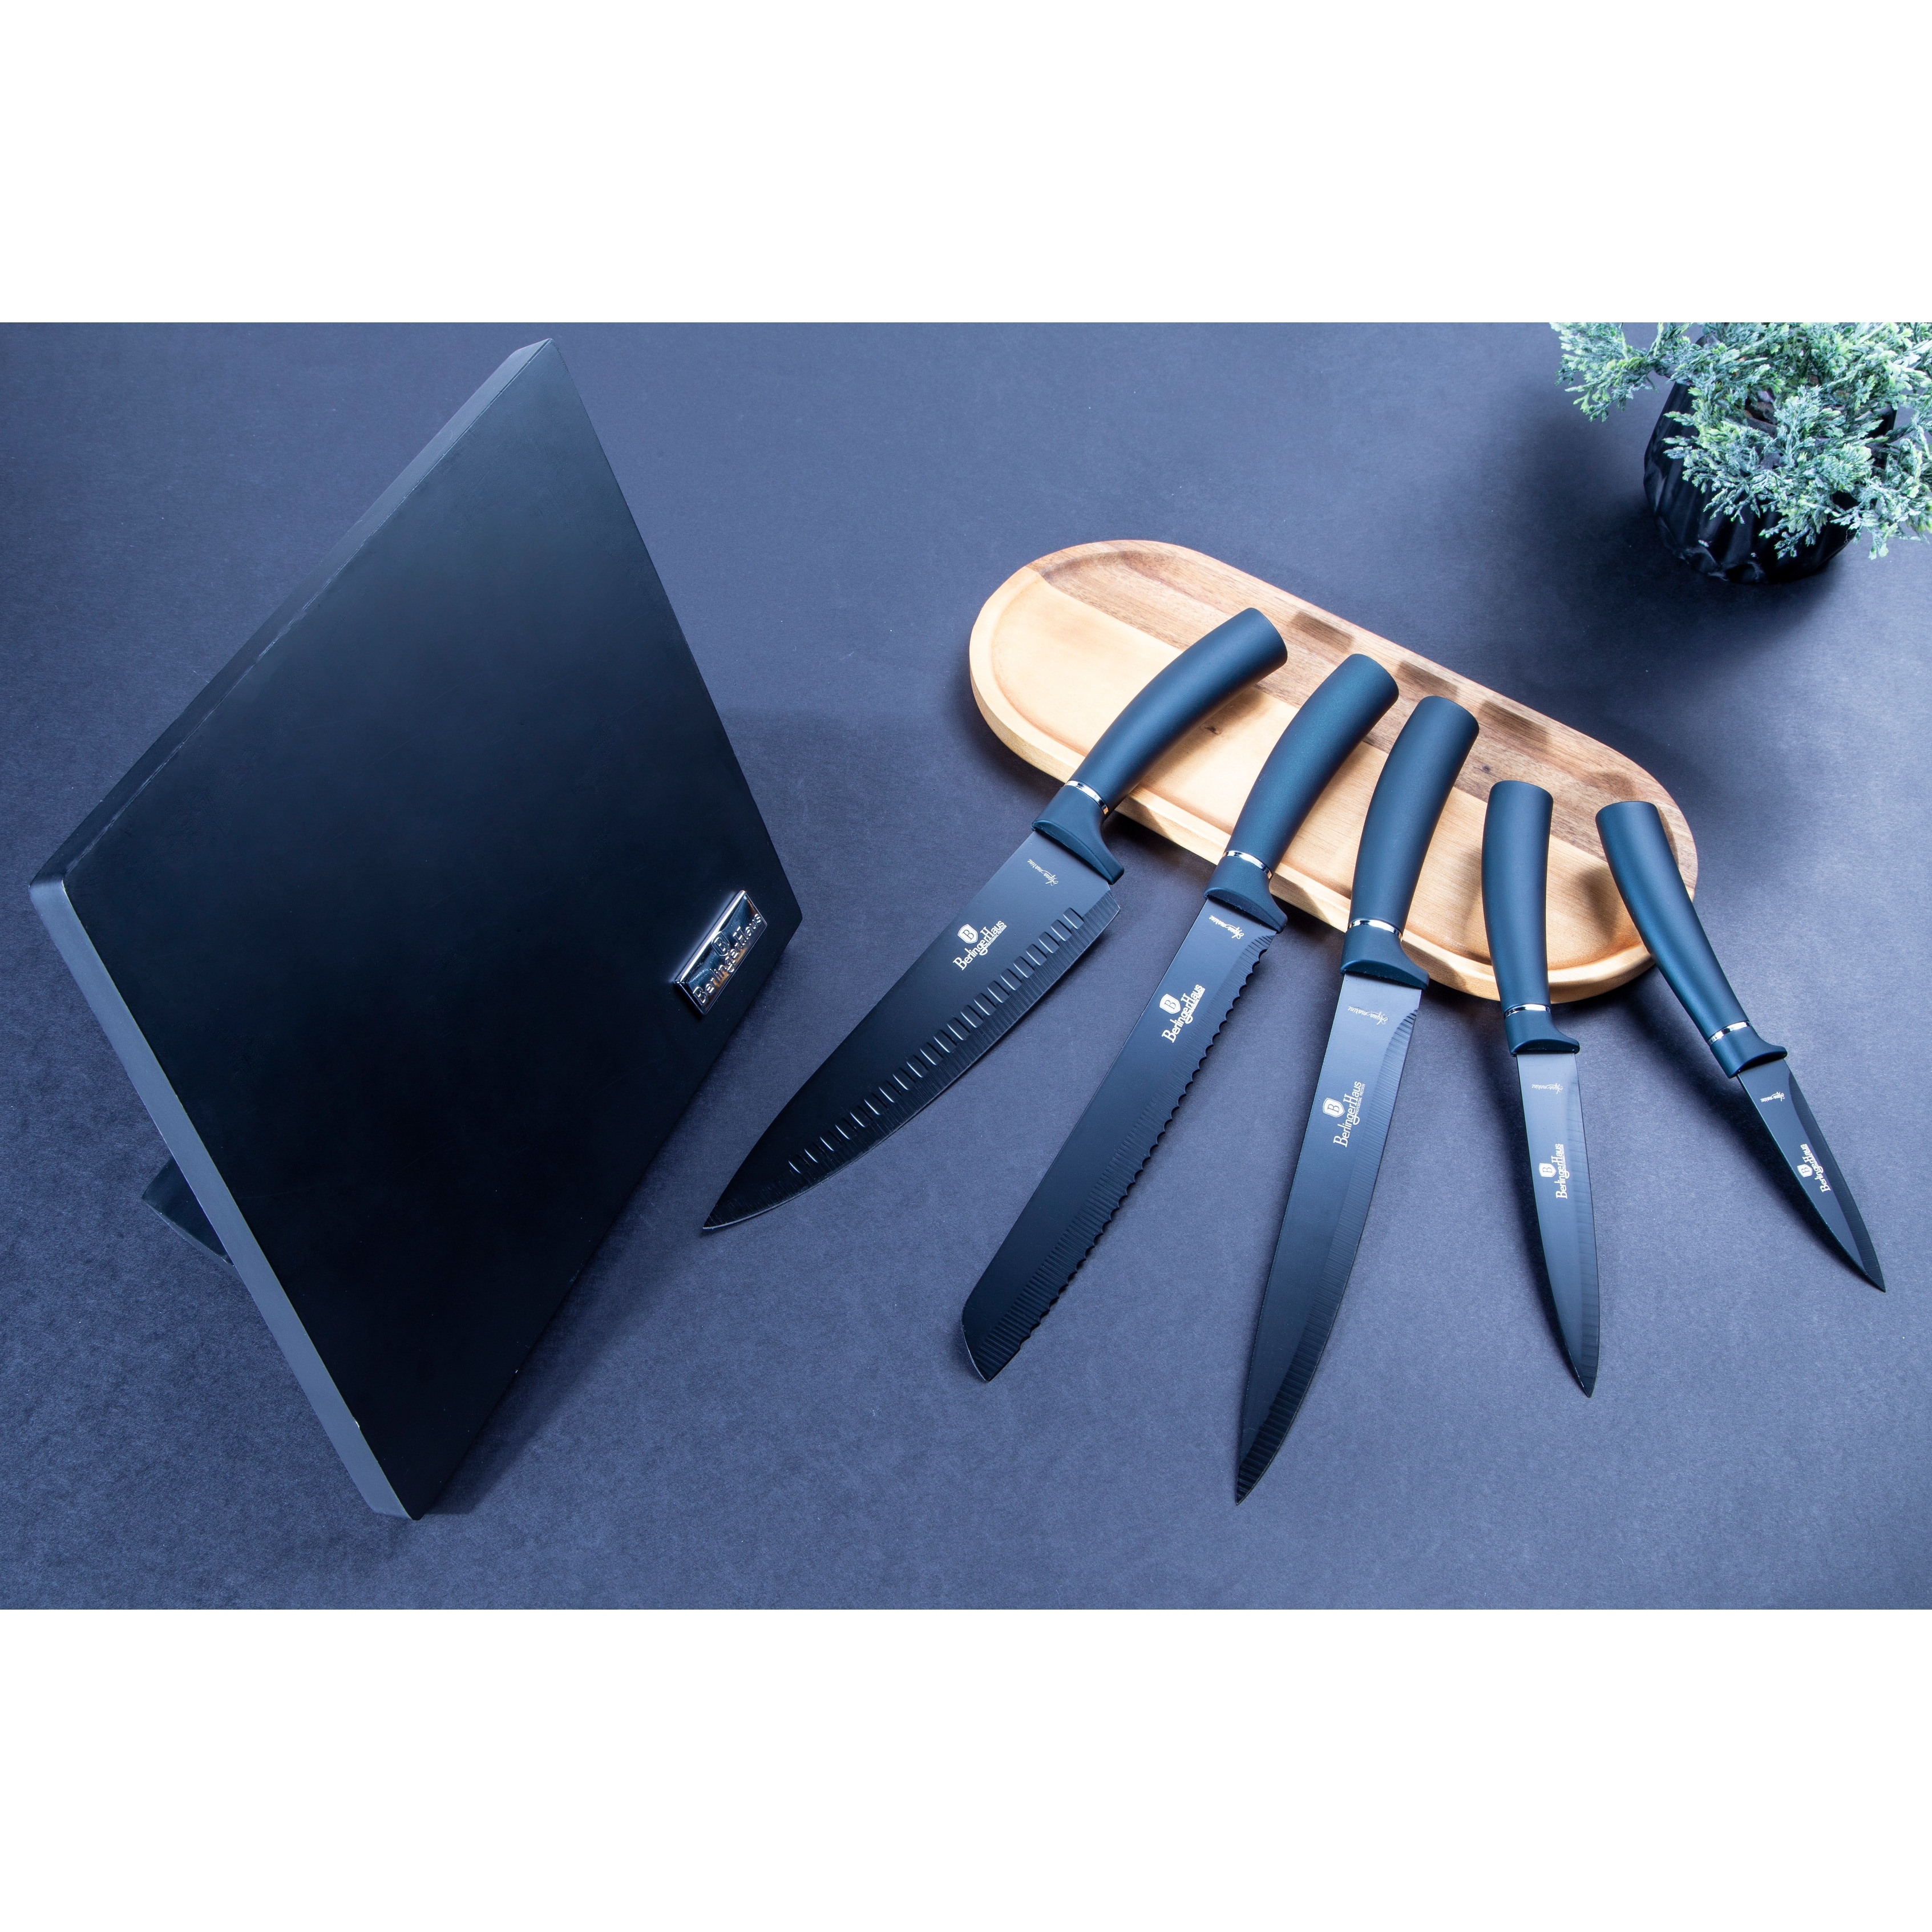 https://ak1.ostkcdn.com/images/products/is/images/direct/e2a0a9f4e32c6c8b1ed07b452a1ae10340707e49/Berlinger-Haus-6-Piece-Knife-Set-w--Magnetic-Hanger%2C-Aquamarine-Collection.jpg